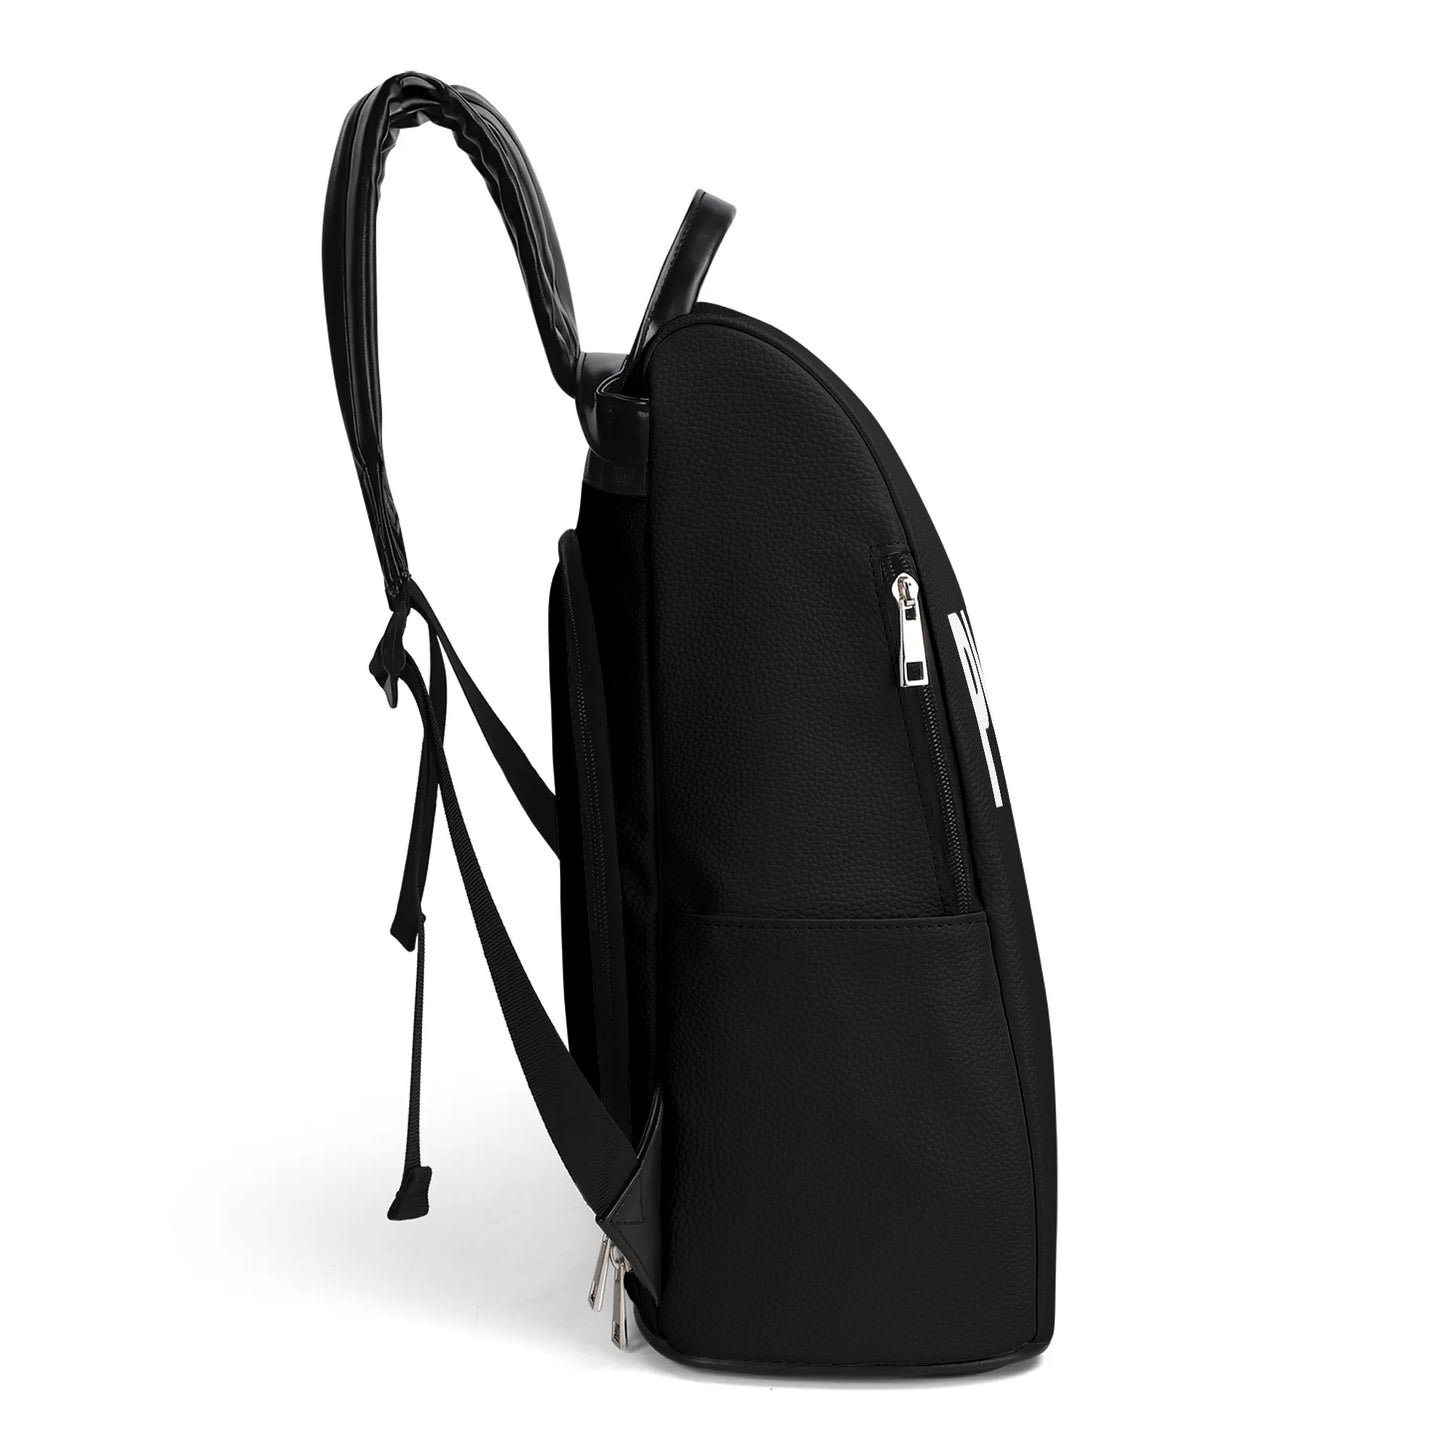 ALL BLACK VEGAN LEATHER ANTI-THEFT BACKPACK